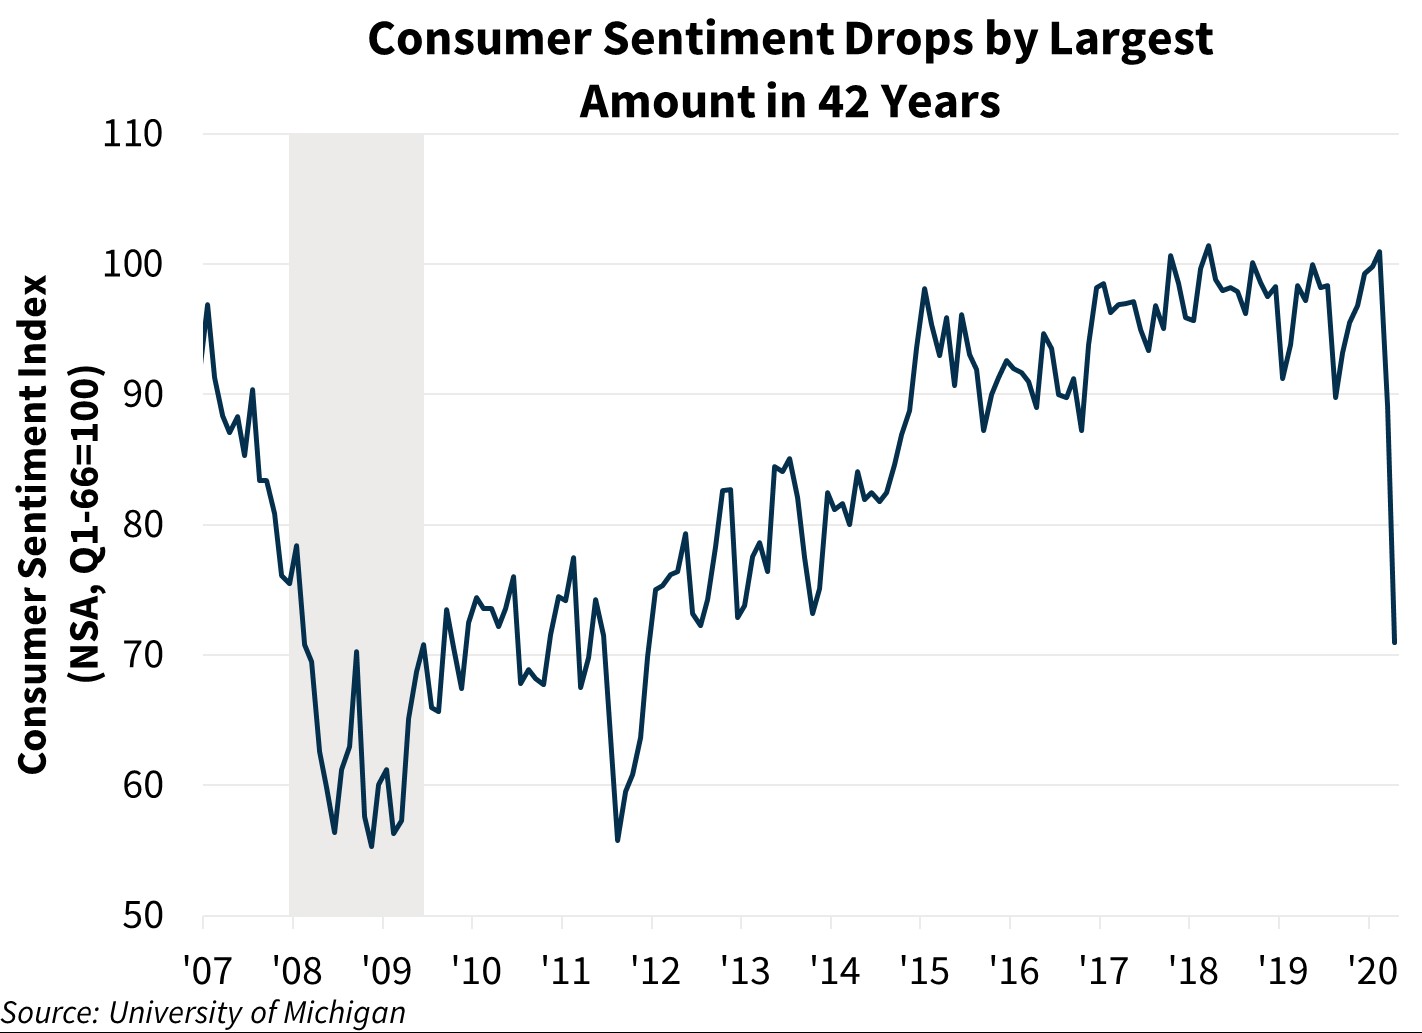  Consumer Sentiment Drops by Largest Amount in 42 yrs 